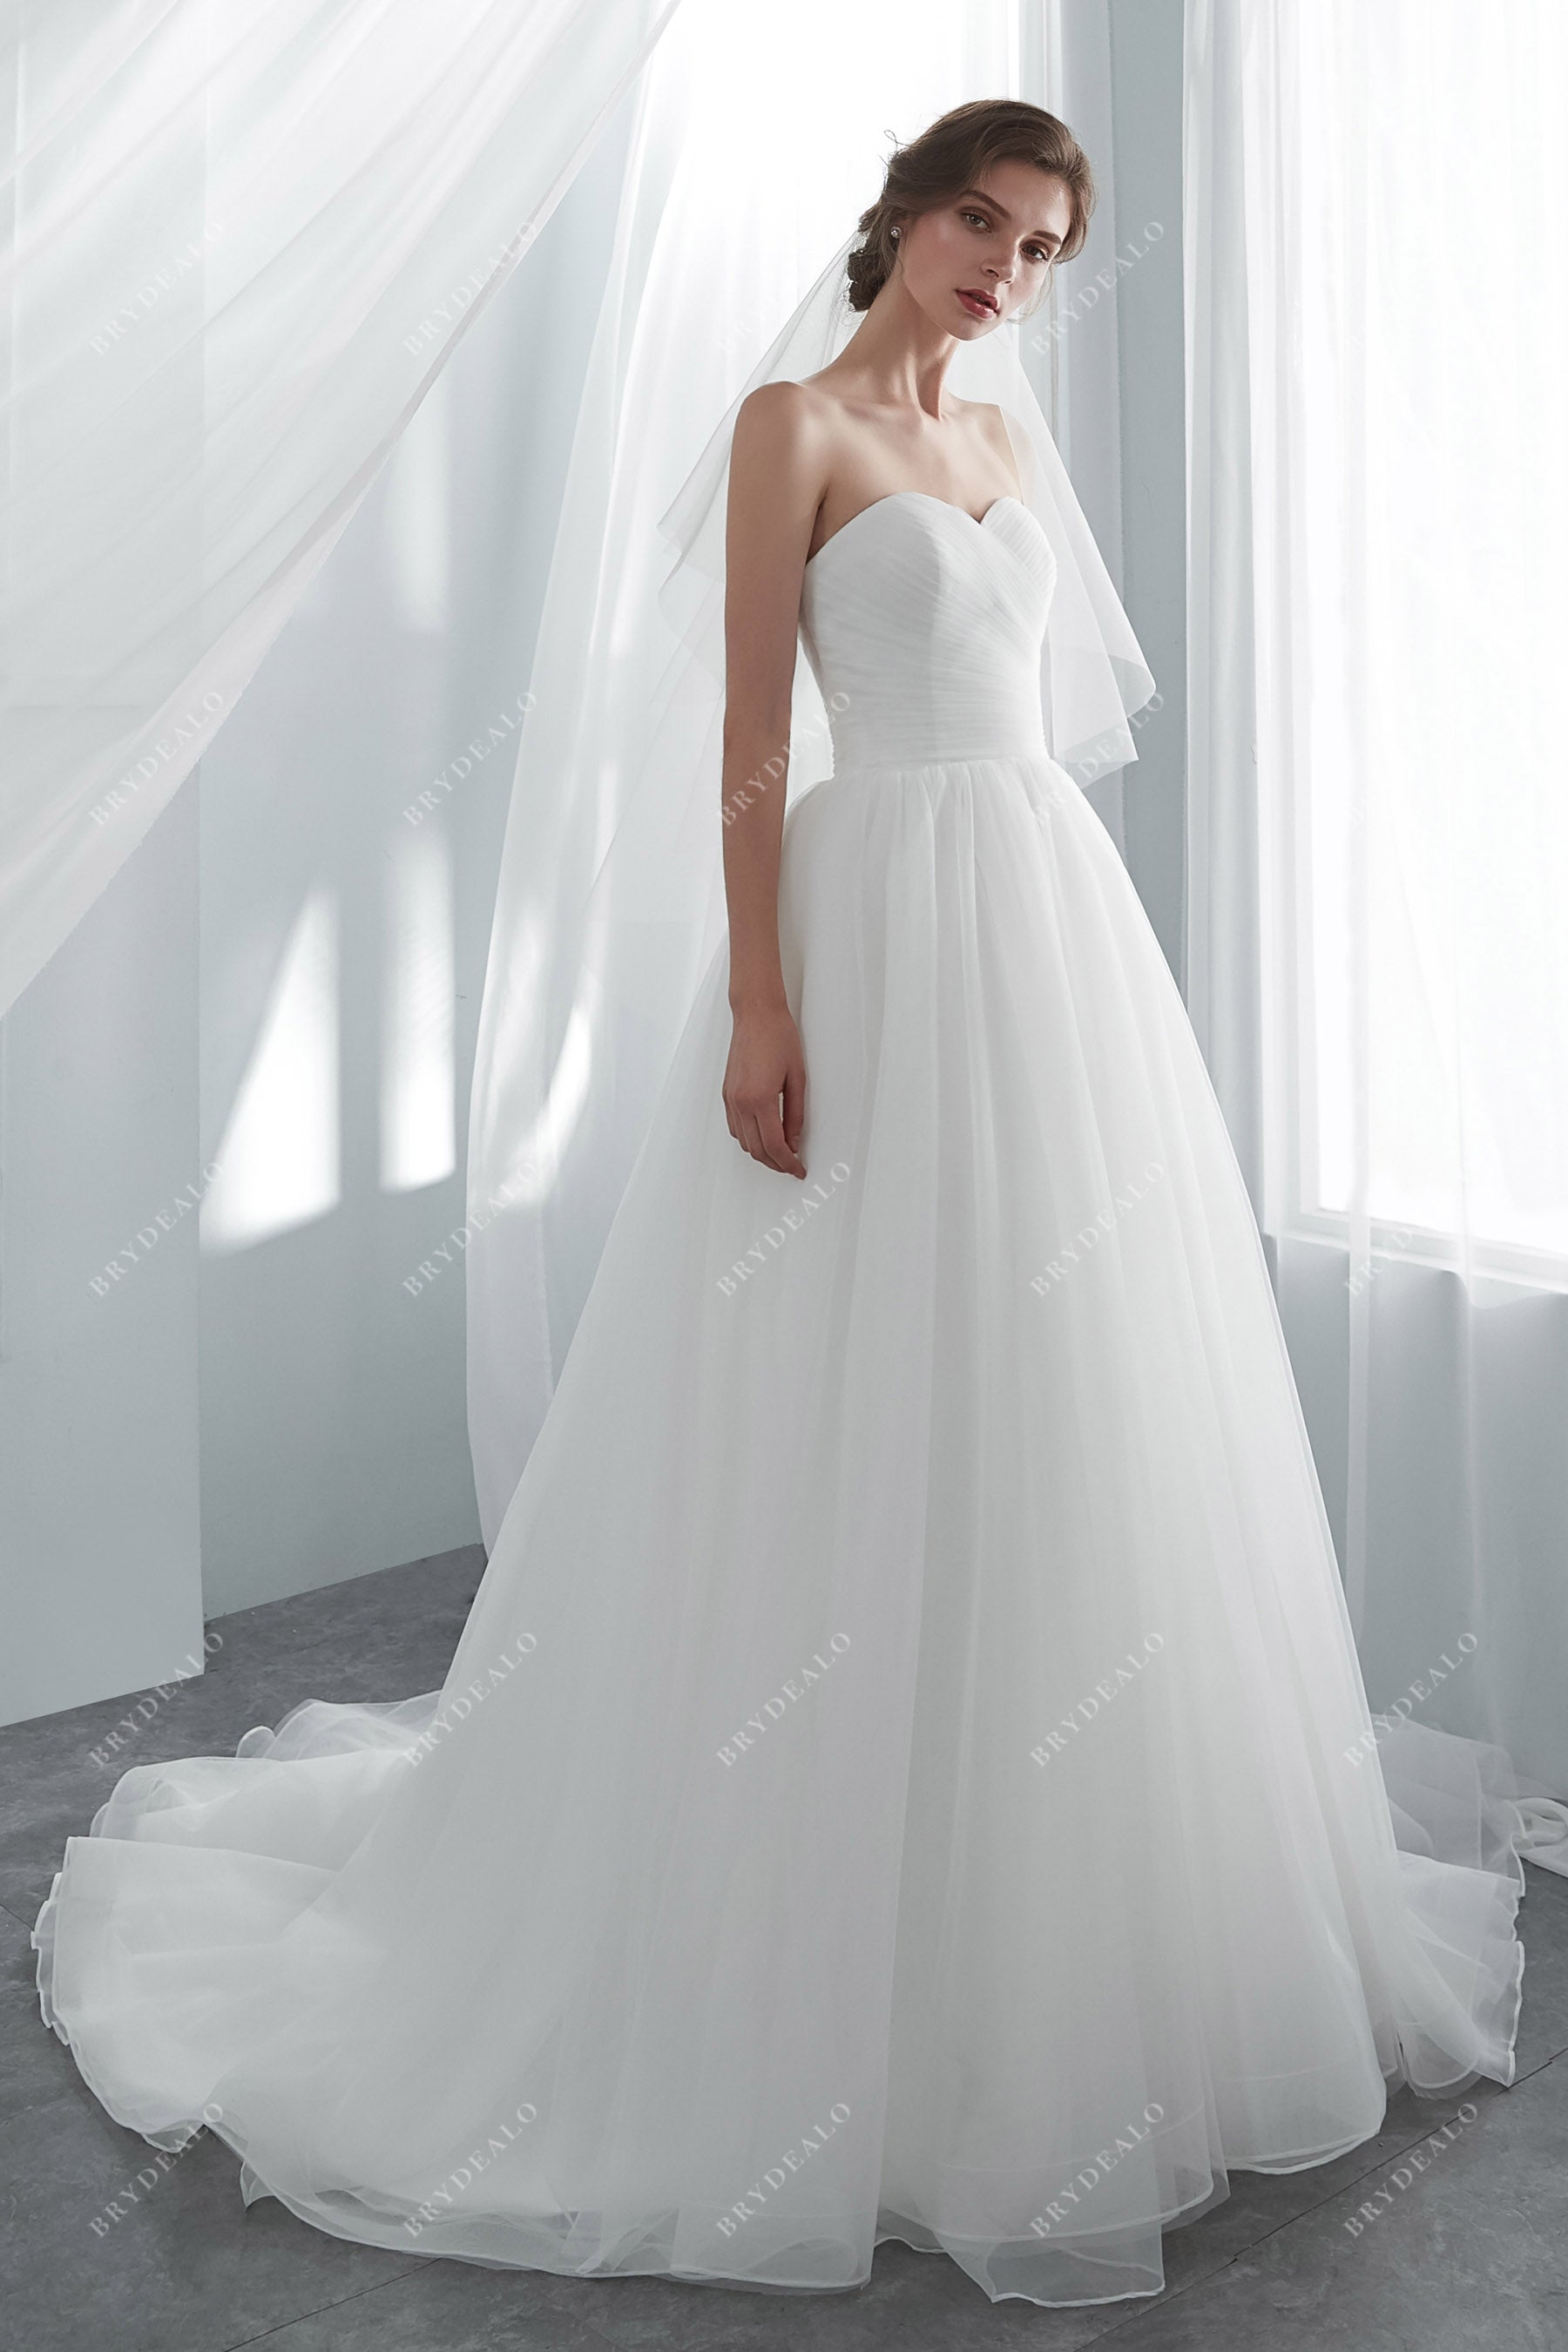 Destination Strapless Sweetheart Bridal Gown